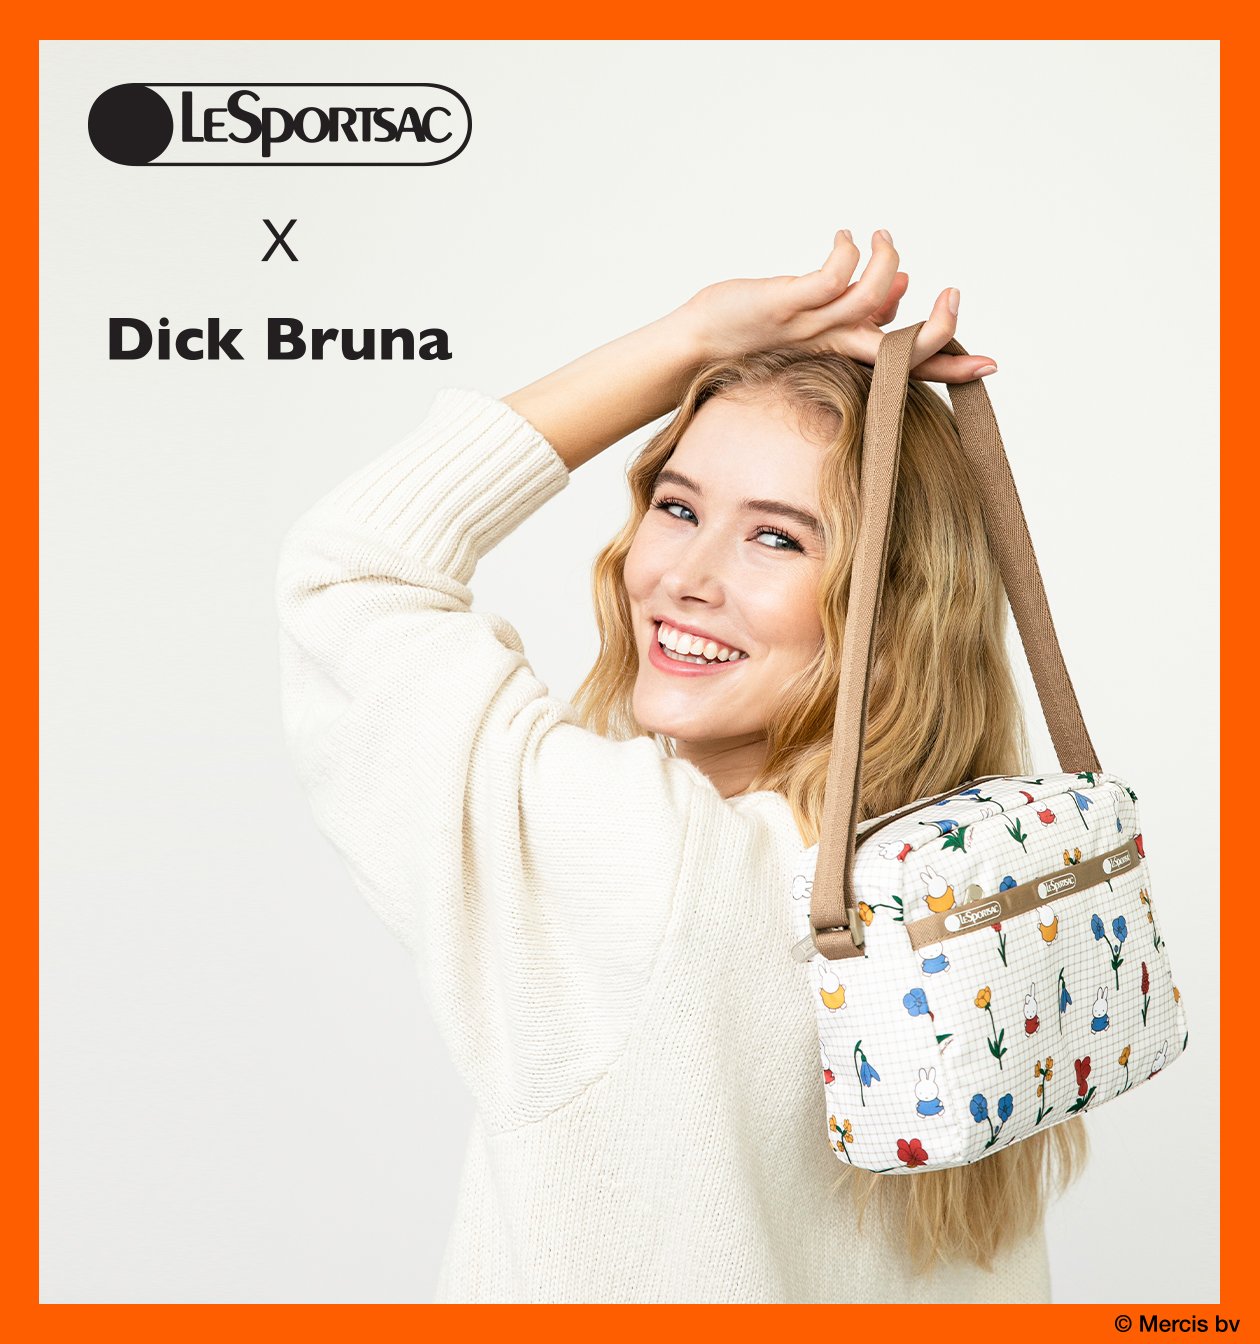 LeSportsac: Miffy is back! Shop LeSportsac x Dick Bruna Collection